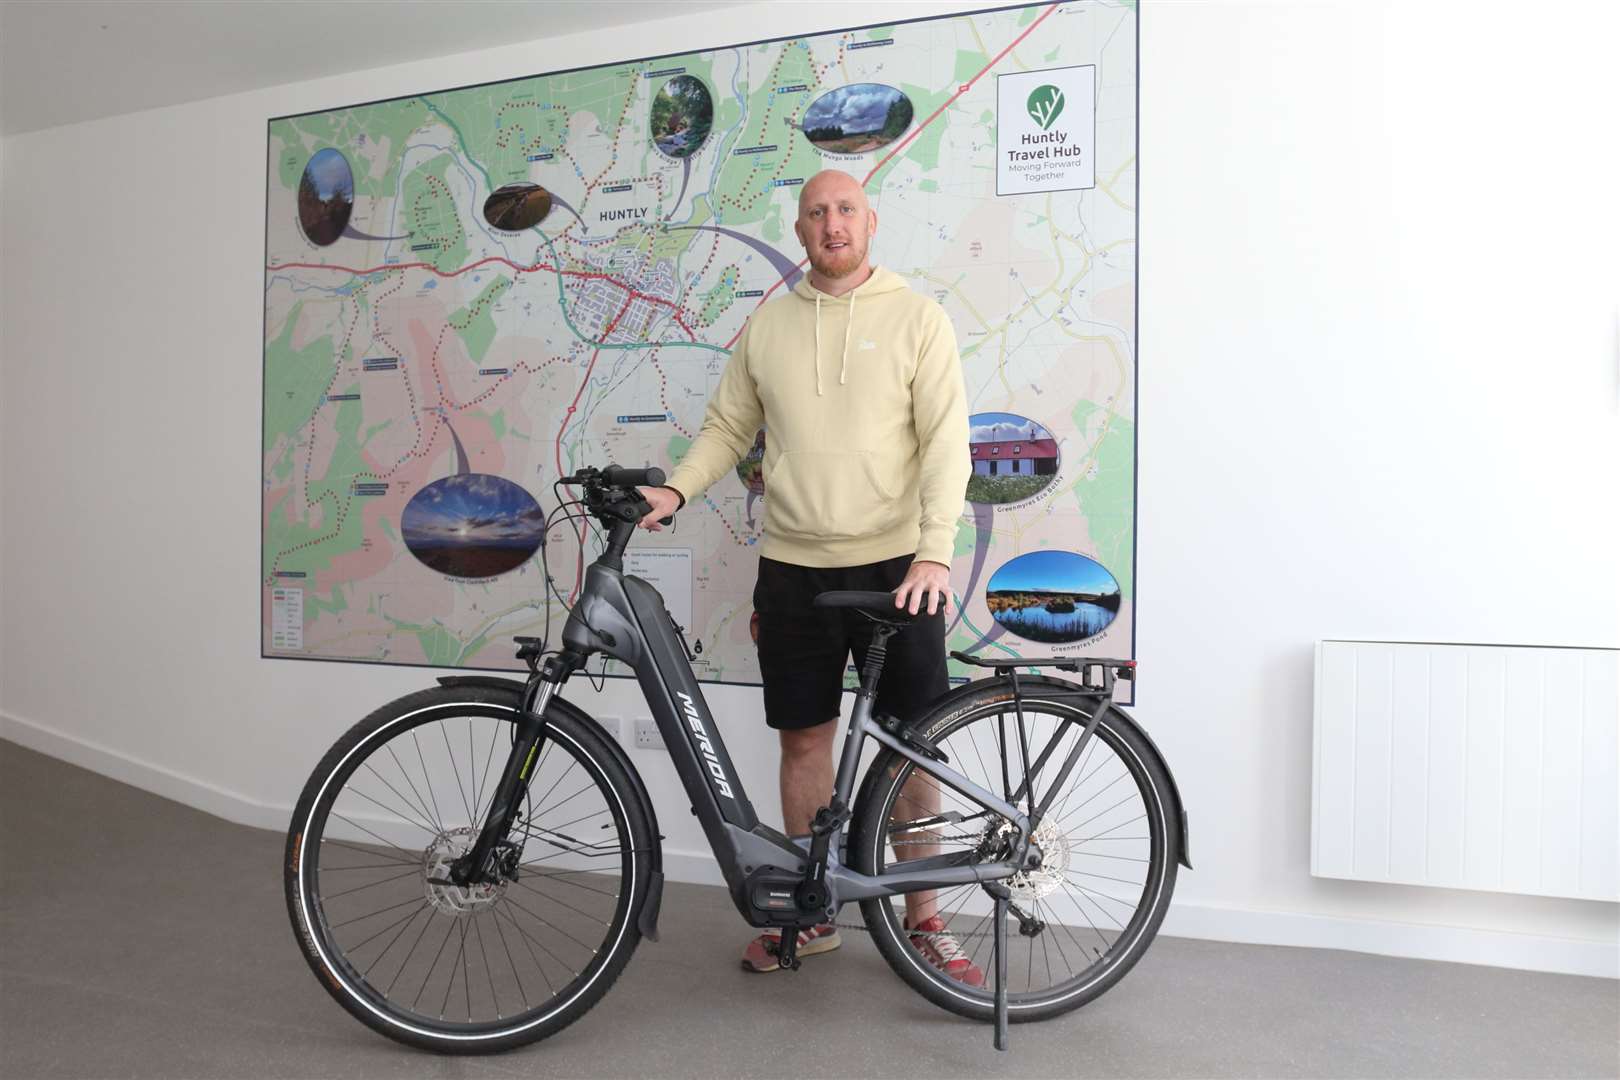 Stuart Masson, manager at Huntly Travel Hub, shows off the service's new map of walking and cycling routes in Huntly during Hairst...Picture: David Porter